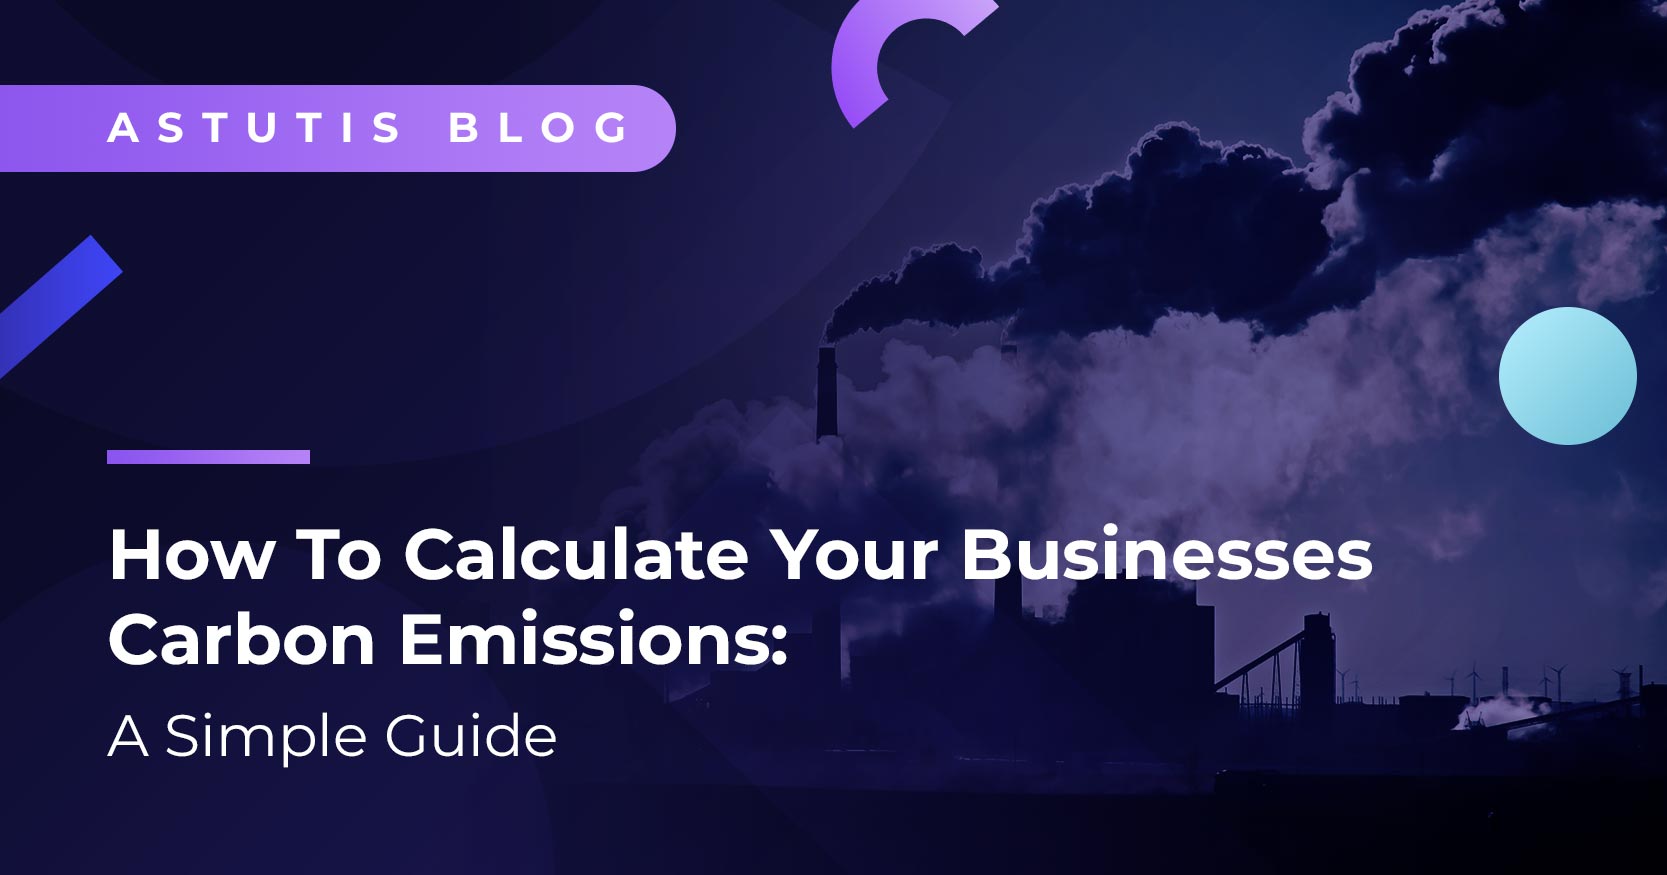 How To Calculate Your Businesses Carbon Emissions: A Simple Guide Image